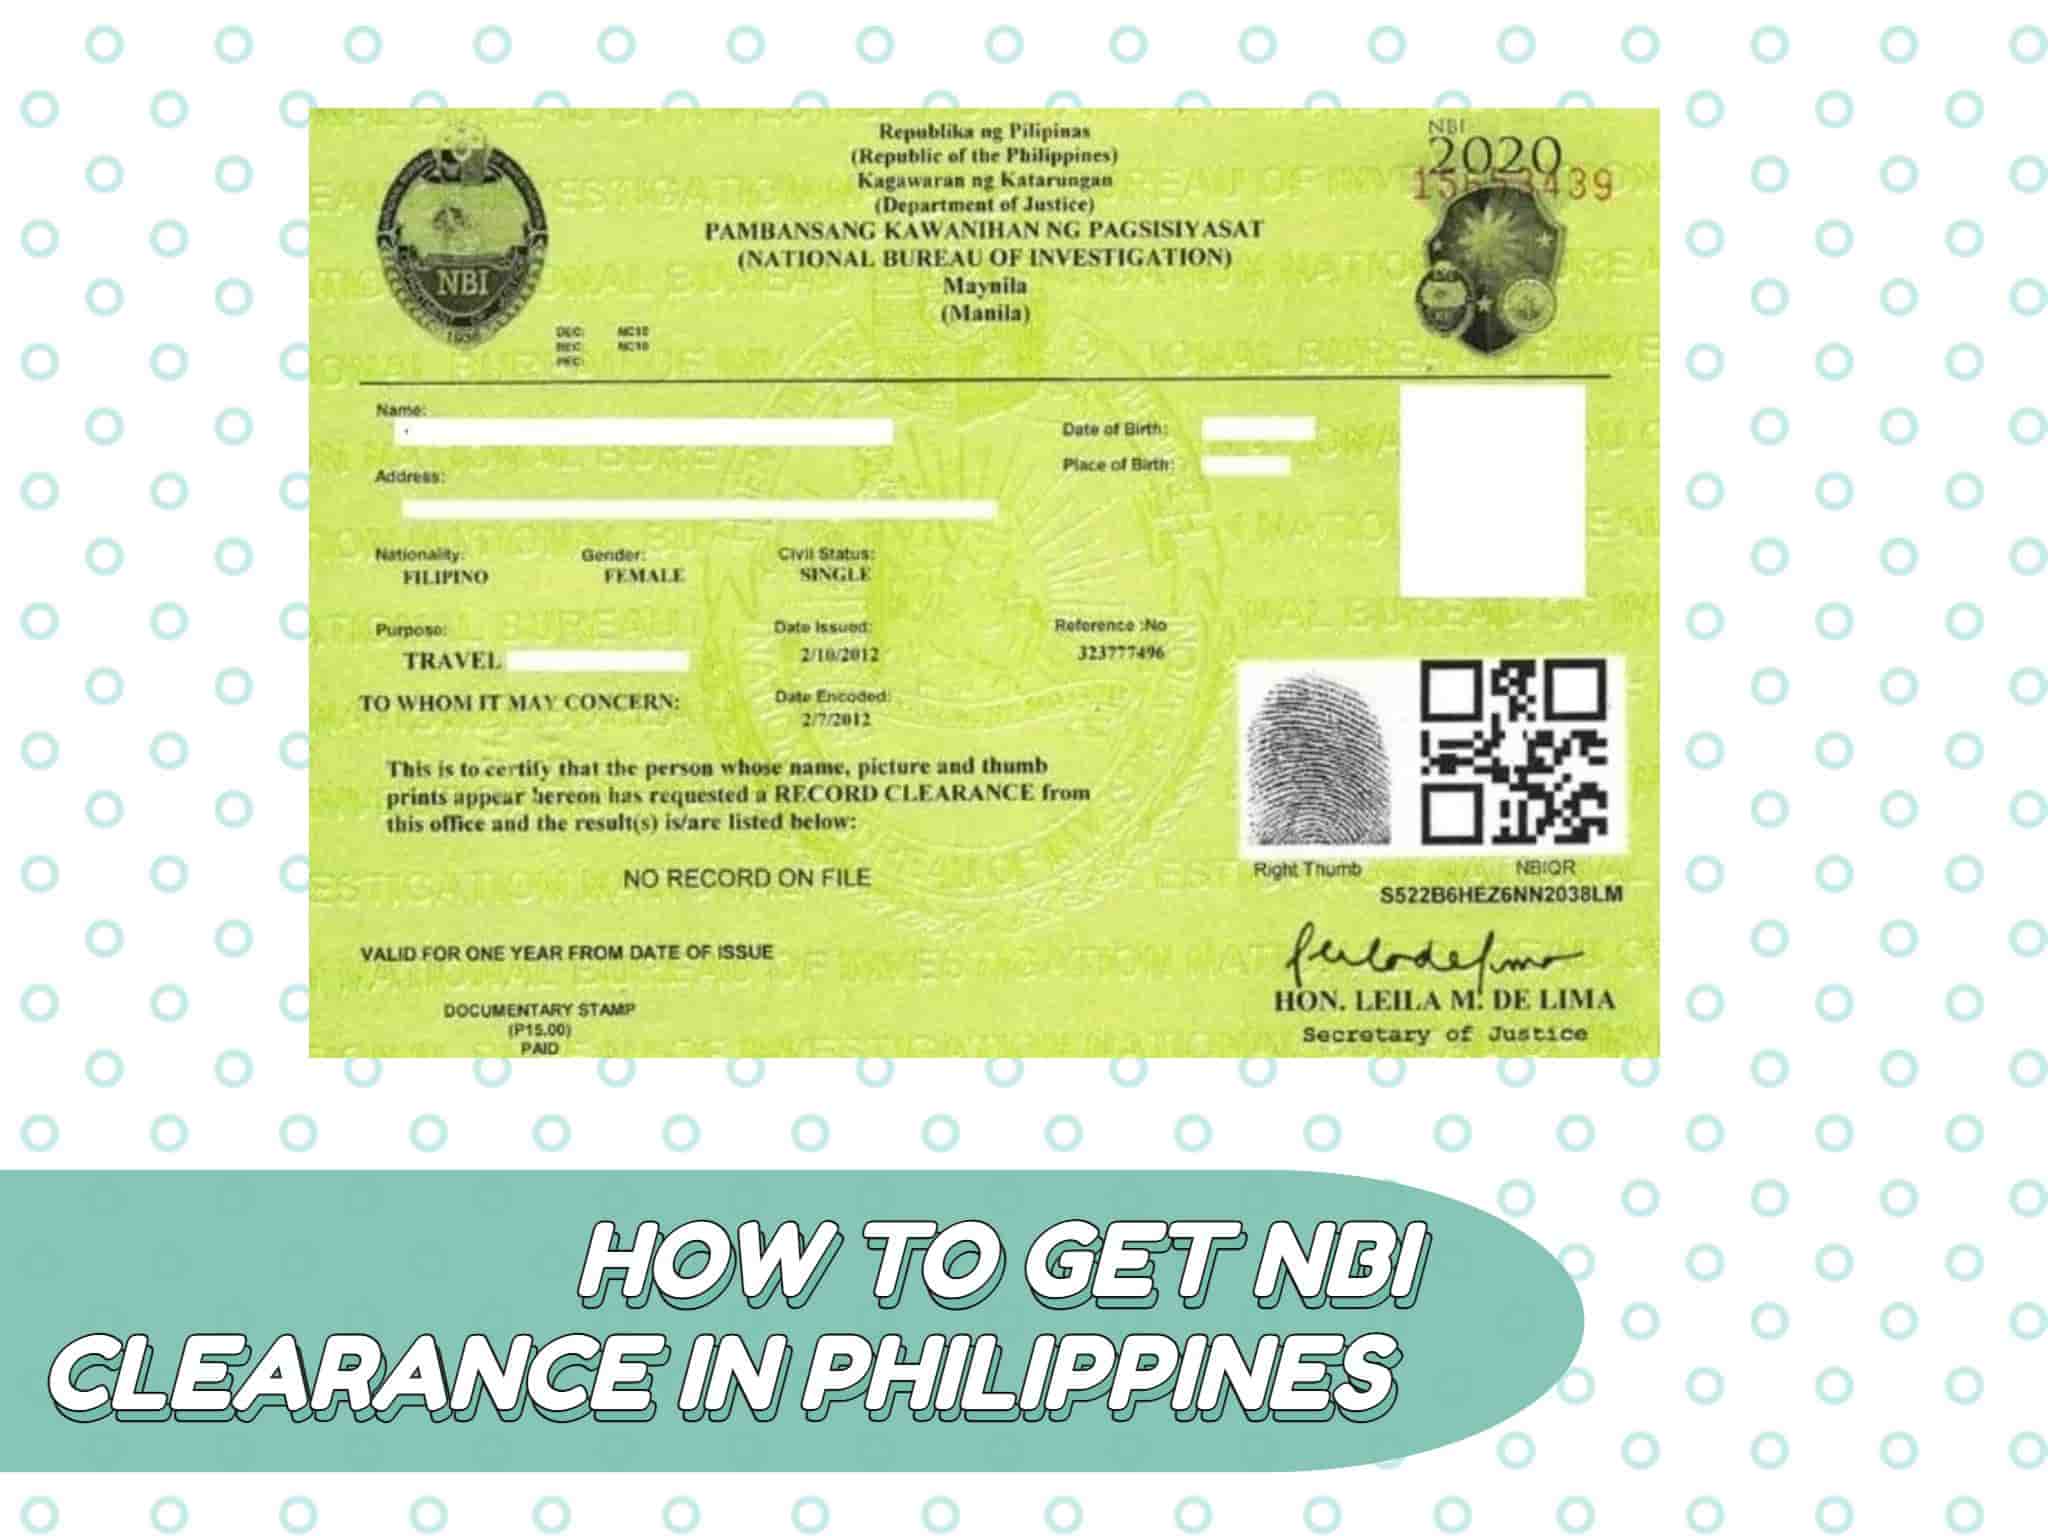 How to Get NBI Clearance Philippines Online